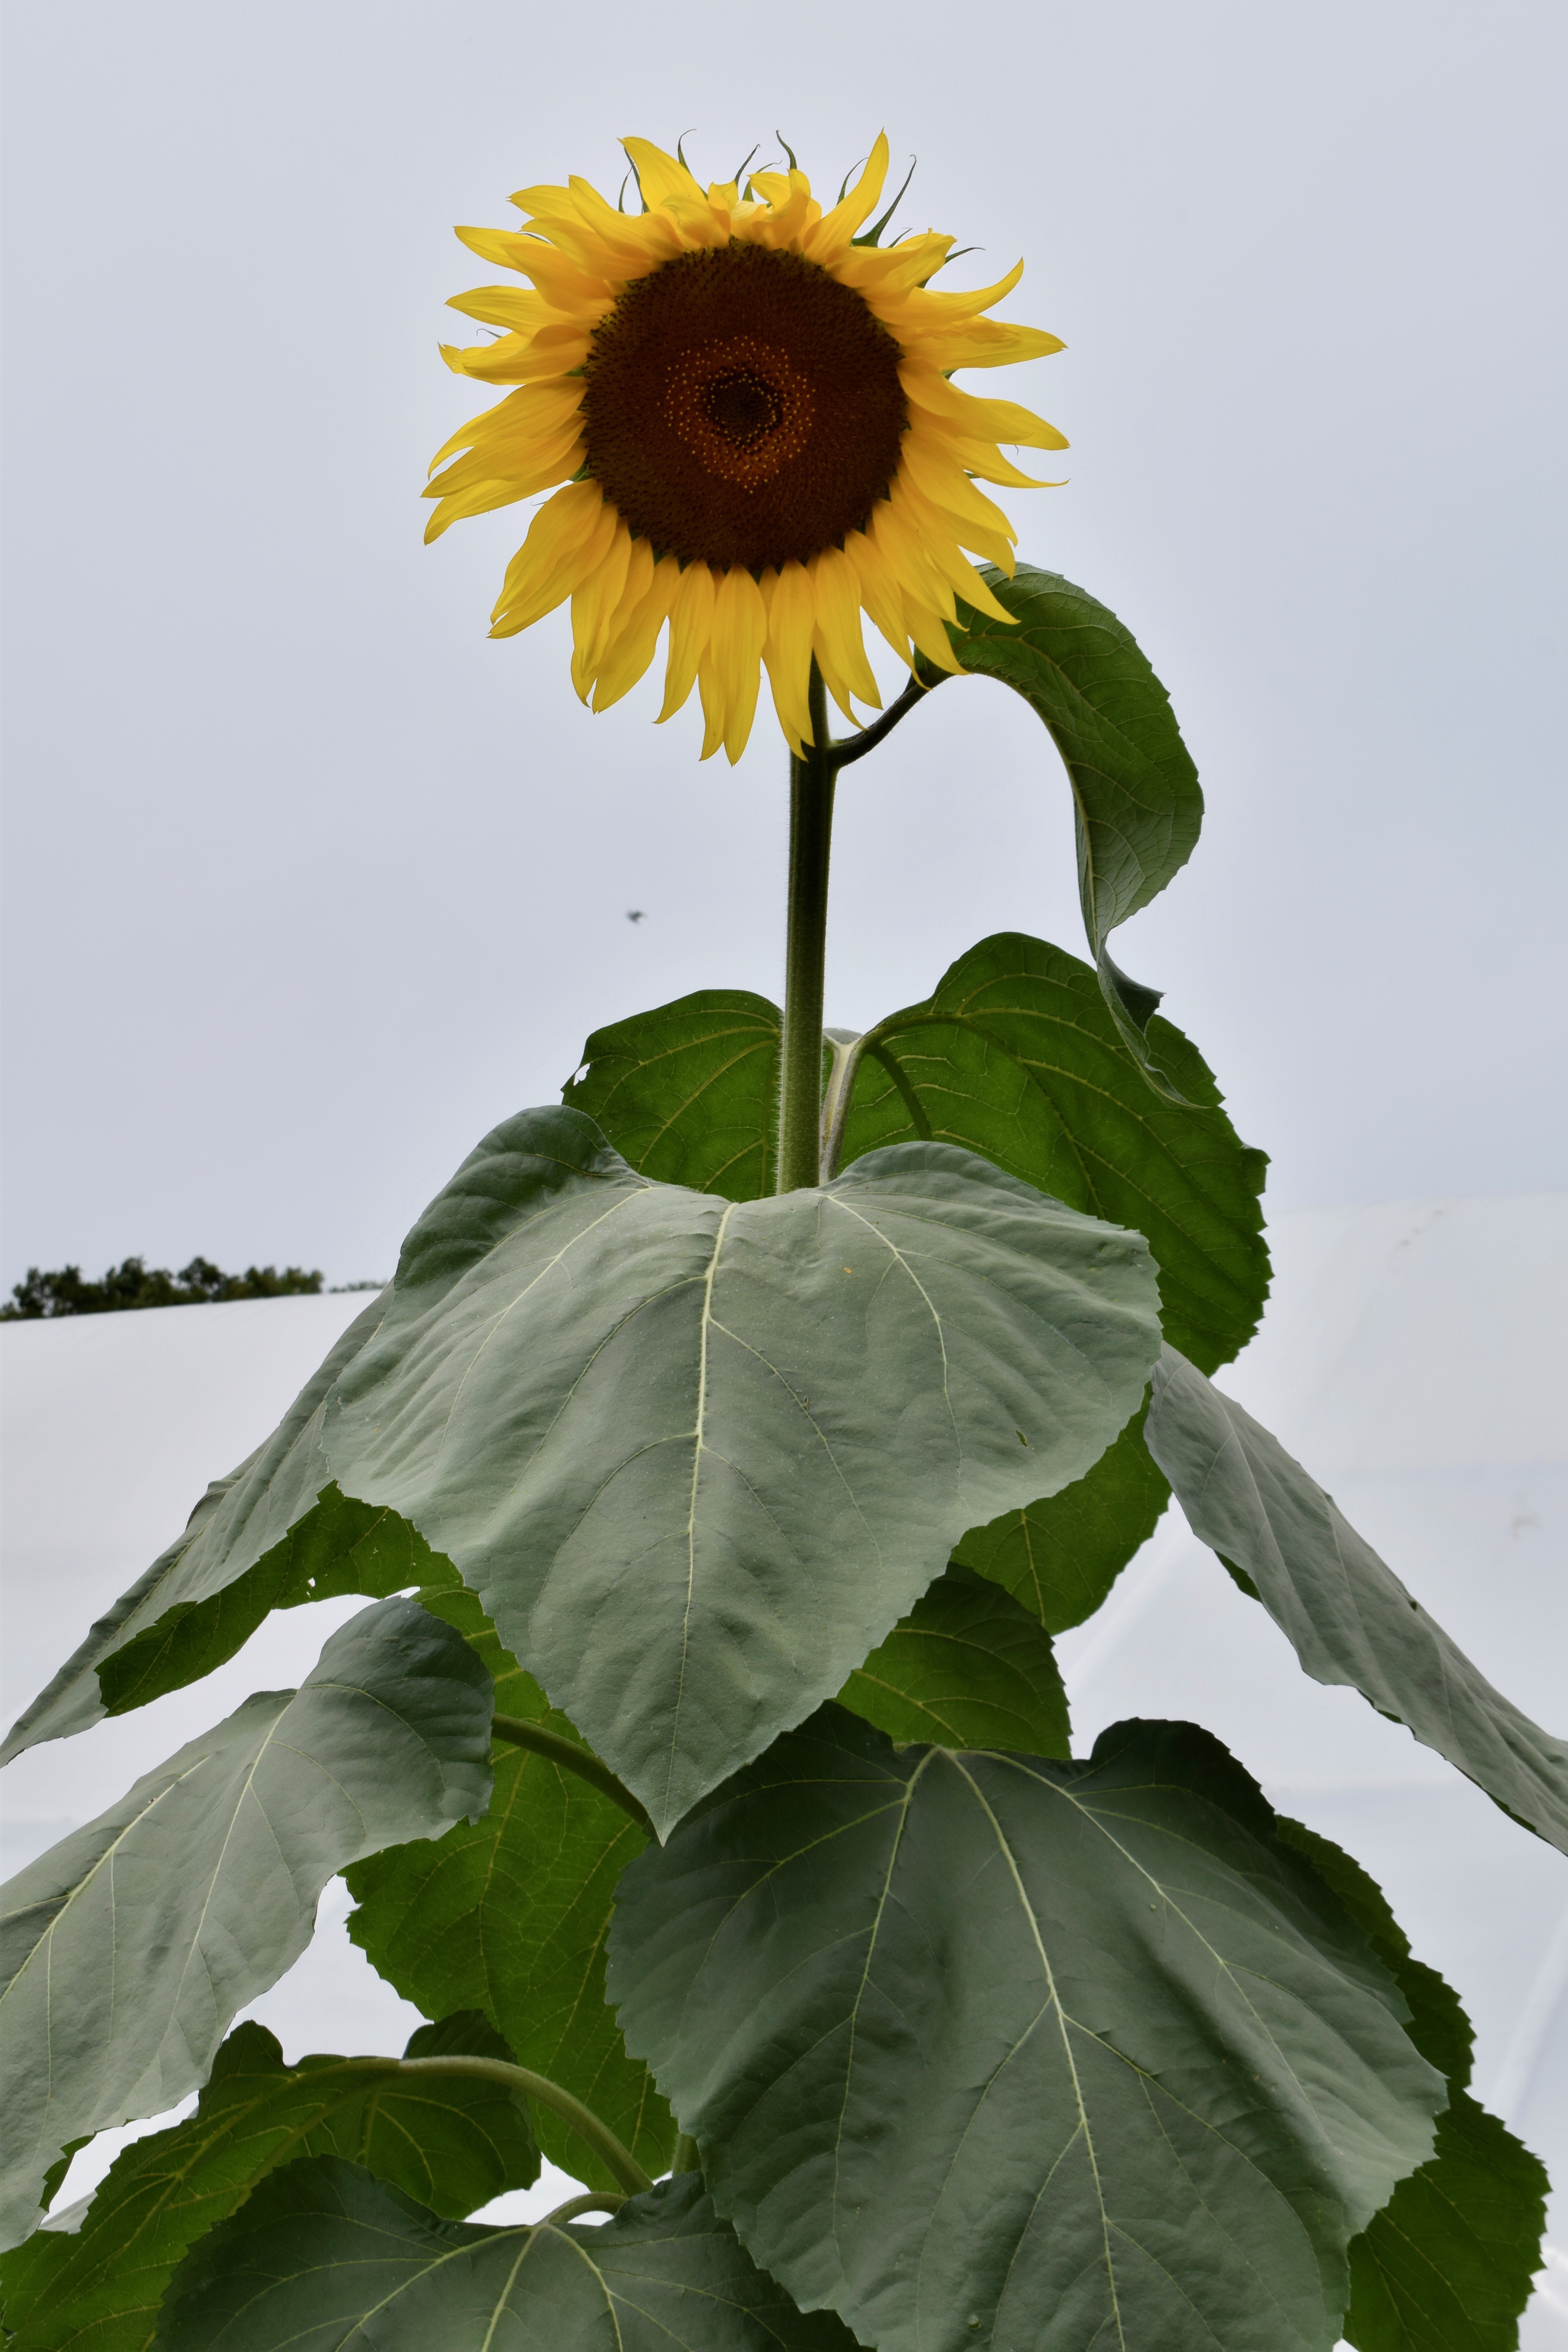 It's the weekend! Number 118, Sunflower